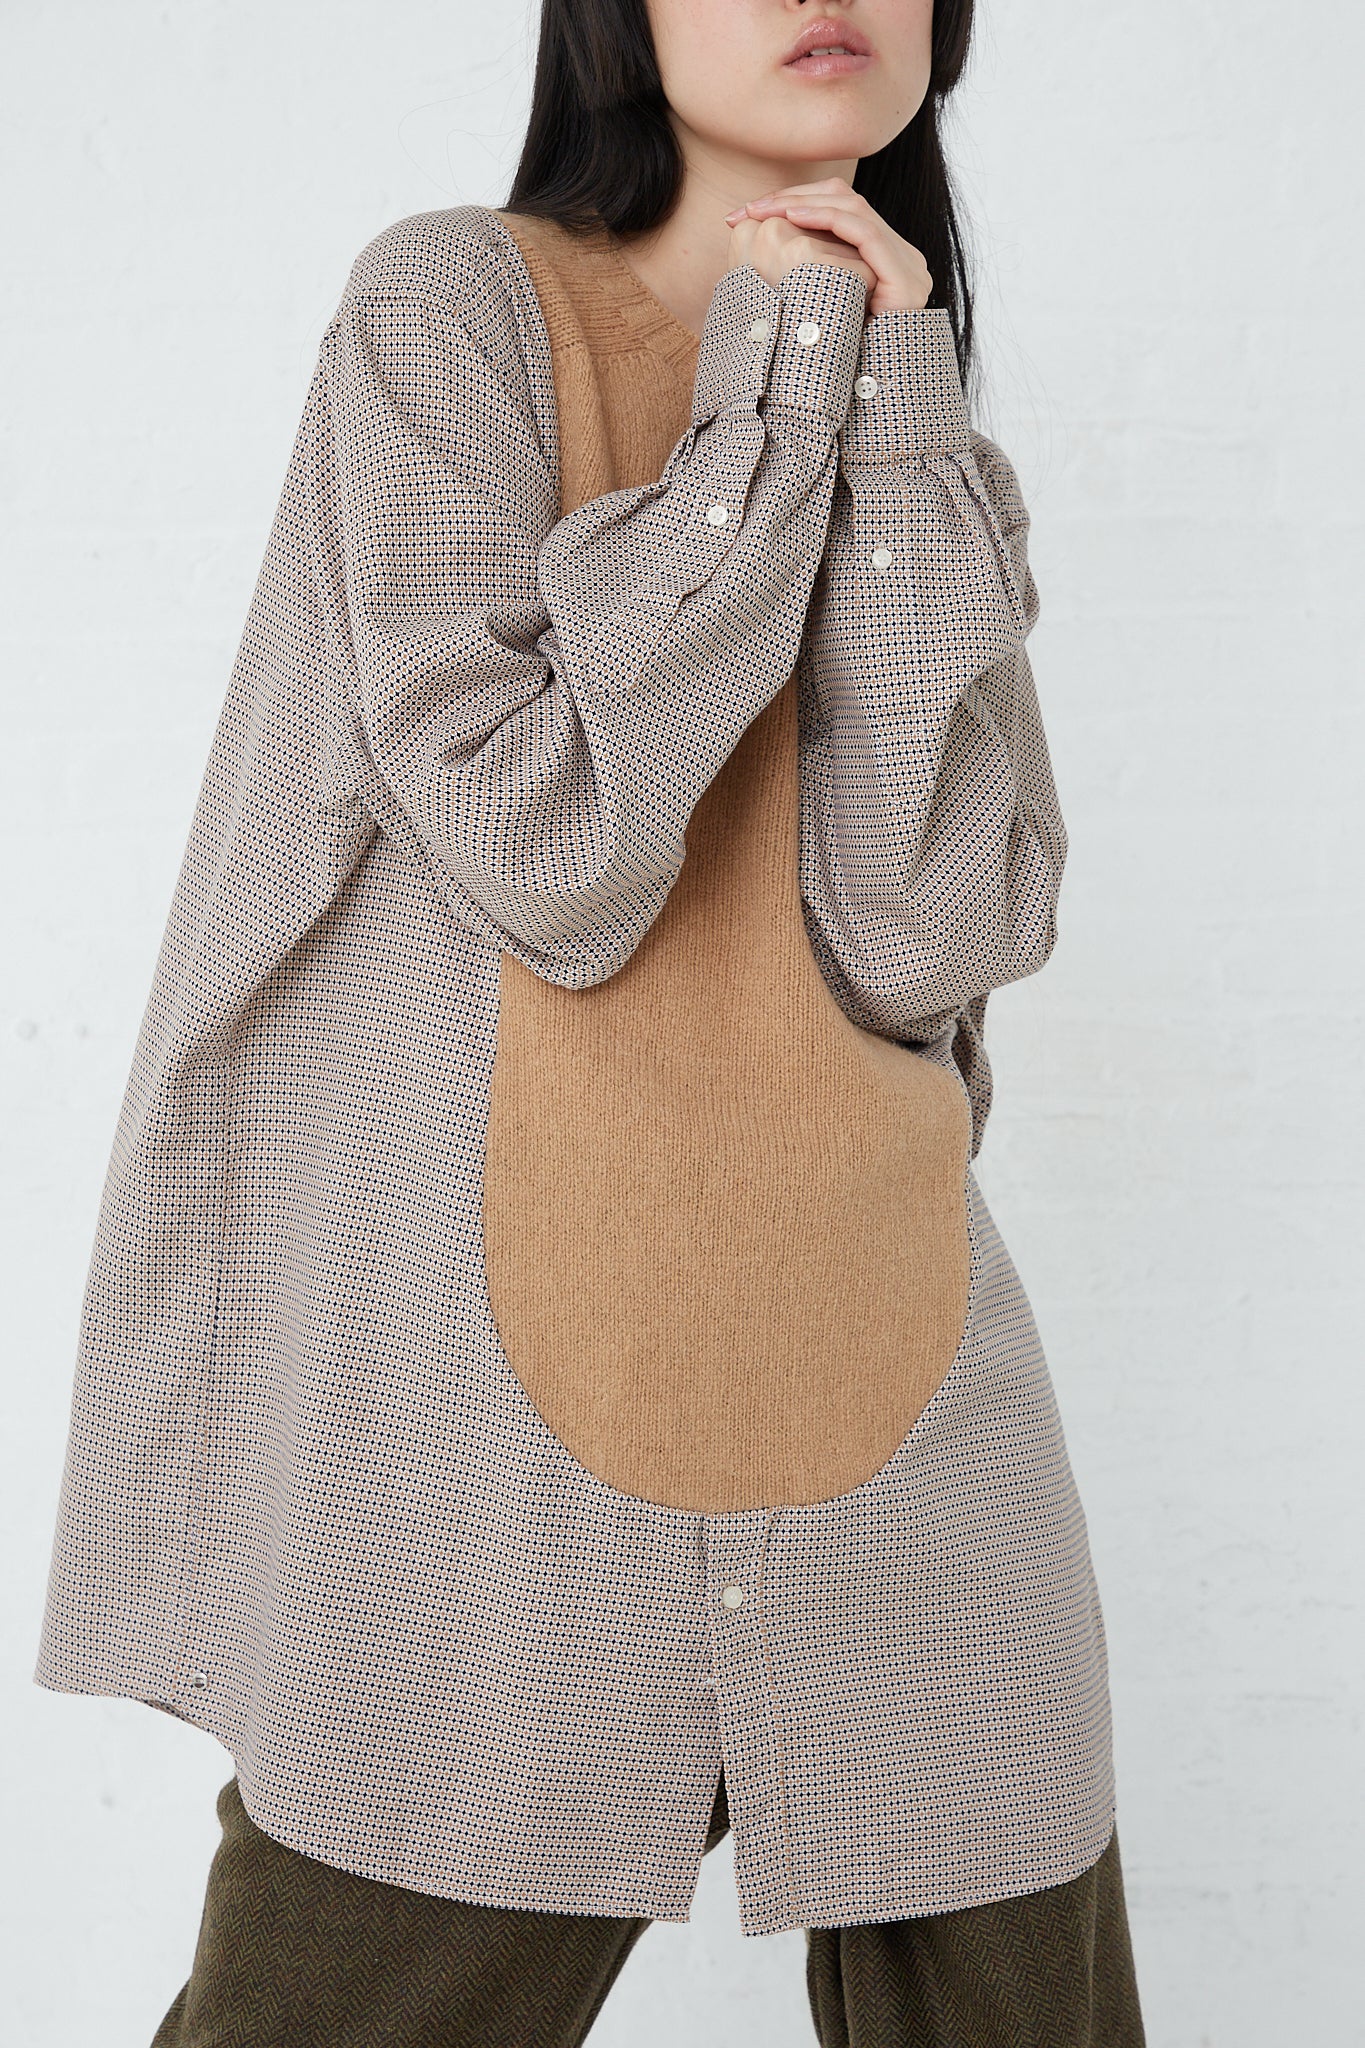 A woman wearing a long sleeve No. 68 Front Insert Pullover in Beige Pattern made of Shetland wool by Bless.